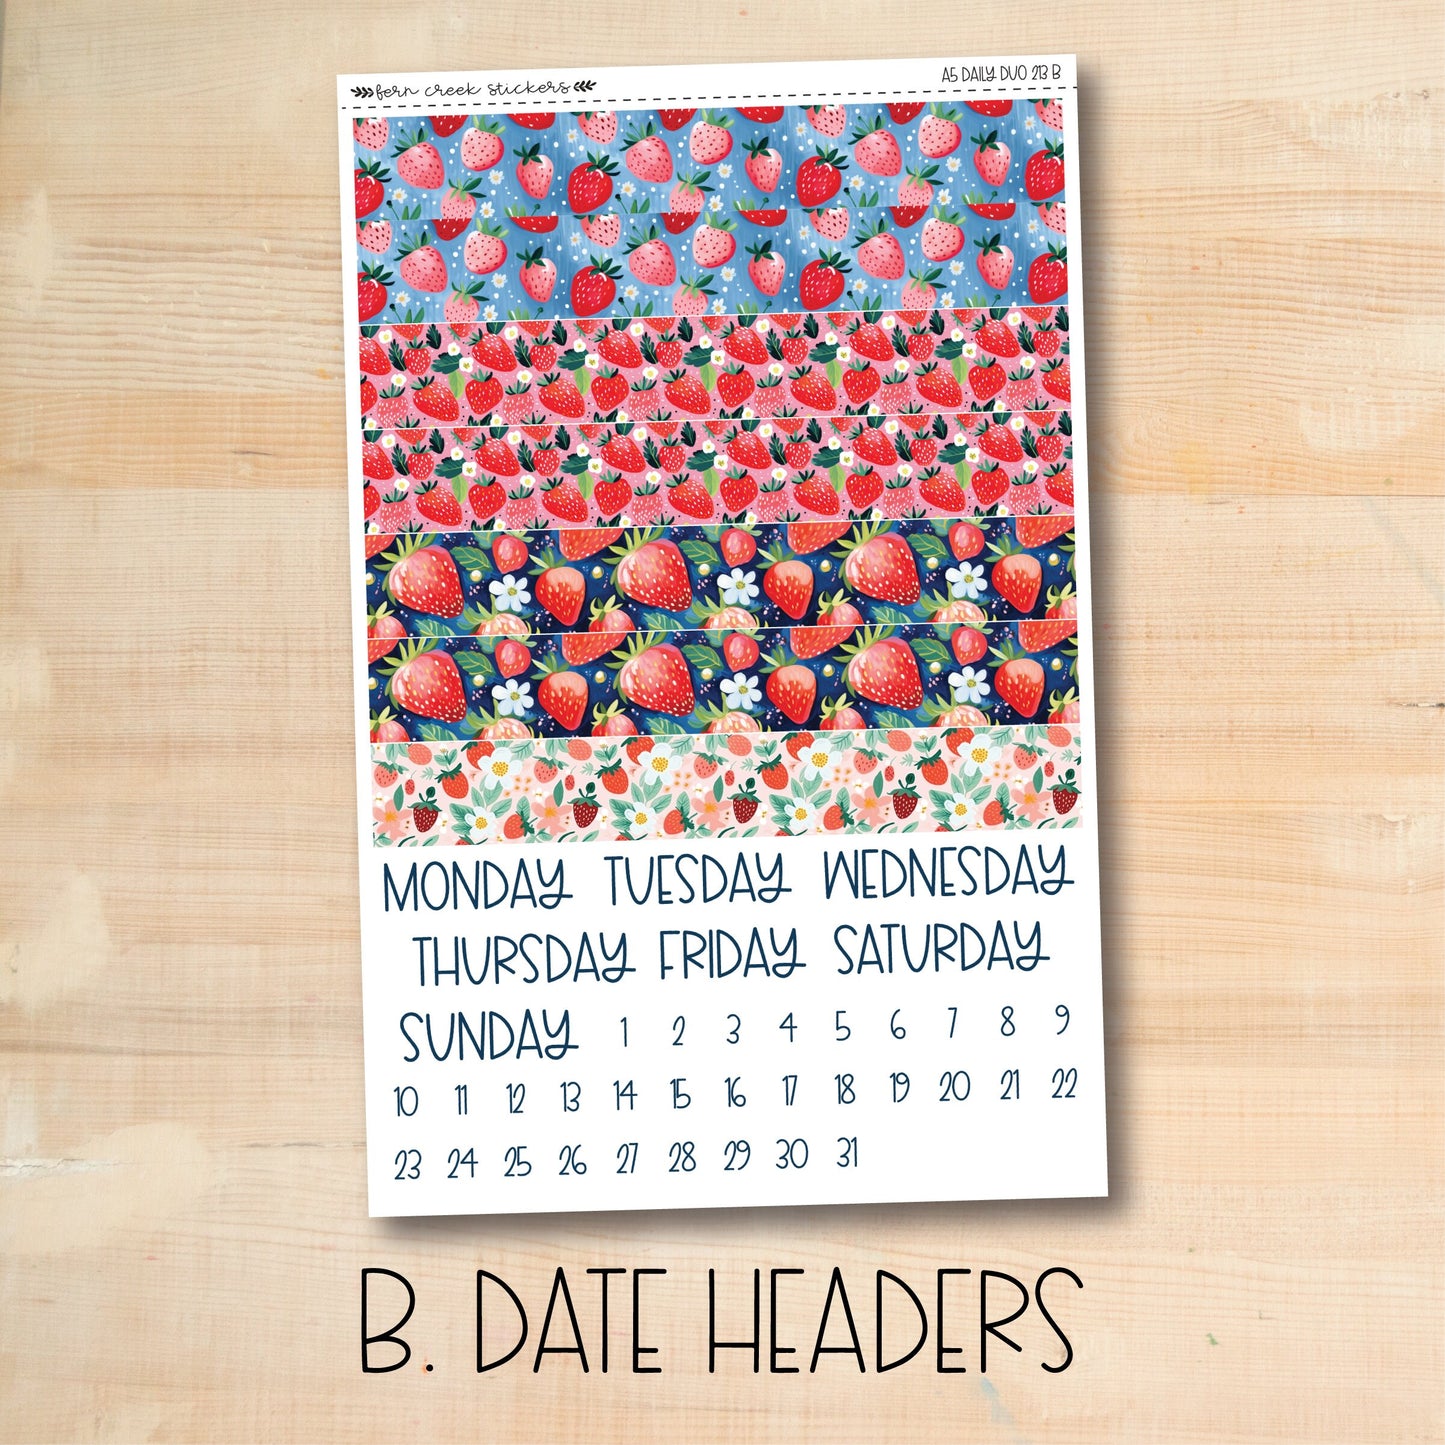 a calendar with strawberries on a wooden table